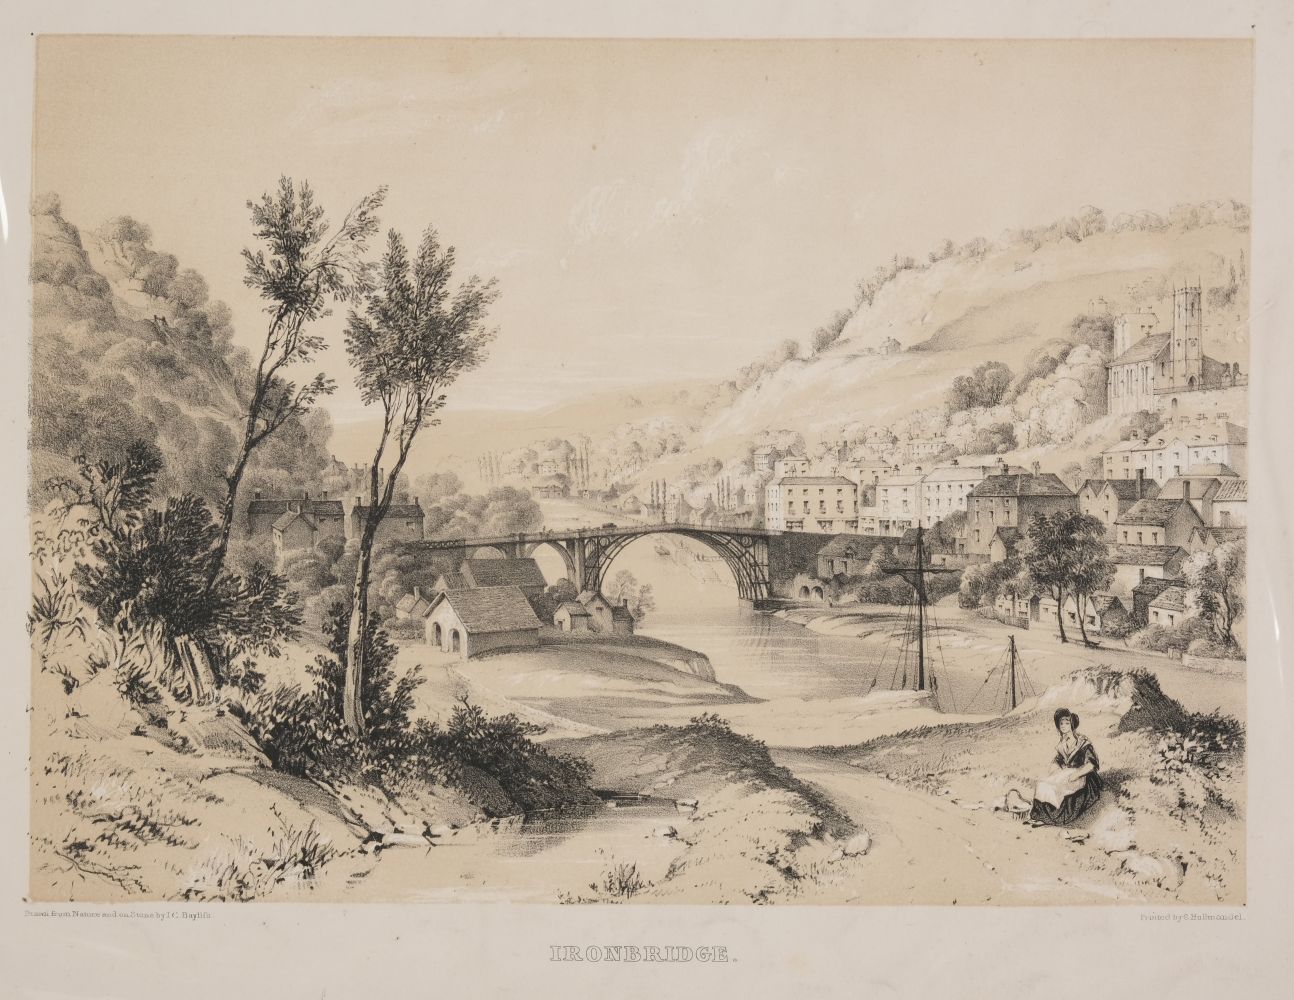 * Haghe (Louis). Galton Bridge. Erected over the new line of the Birmingham Canal at Smethwick, 1826 - Image 3 of 3